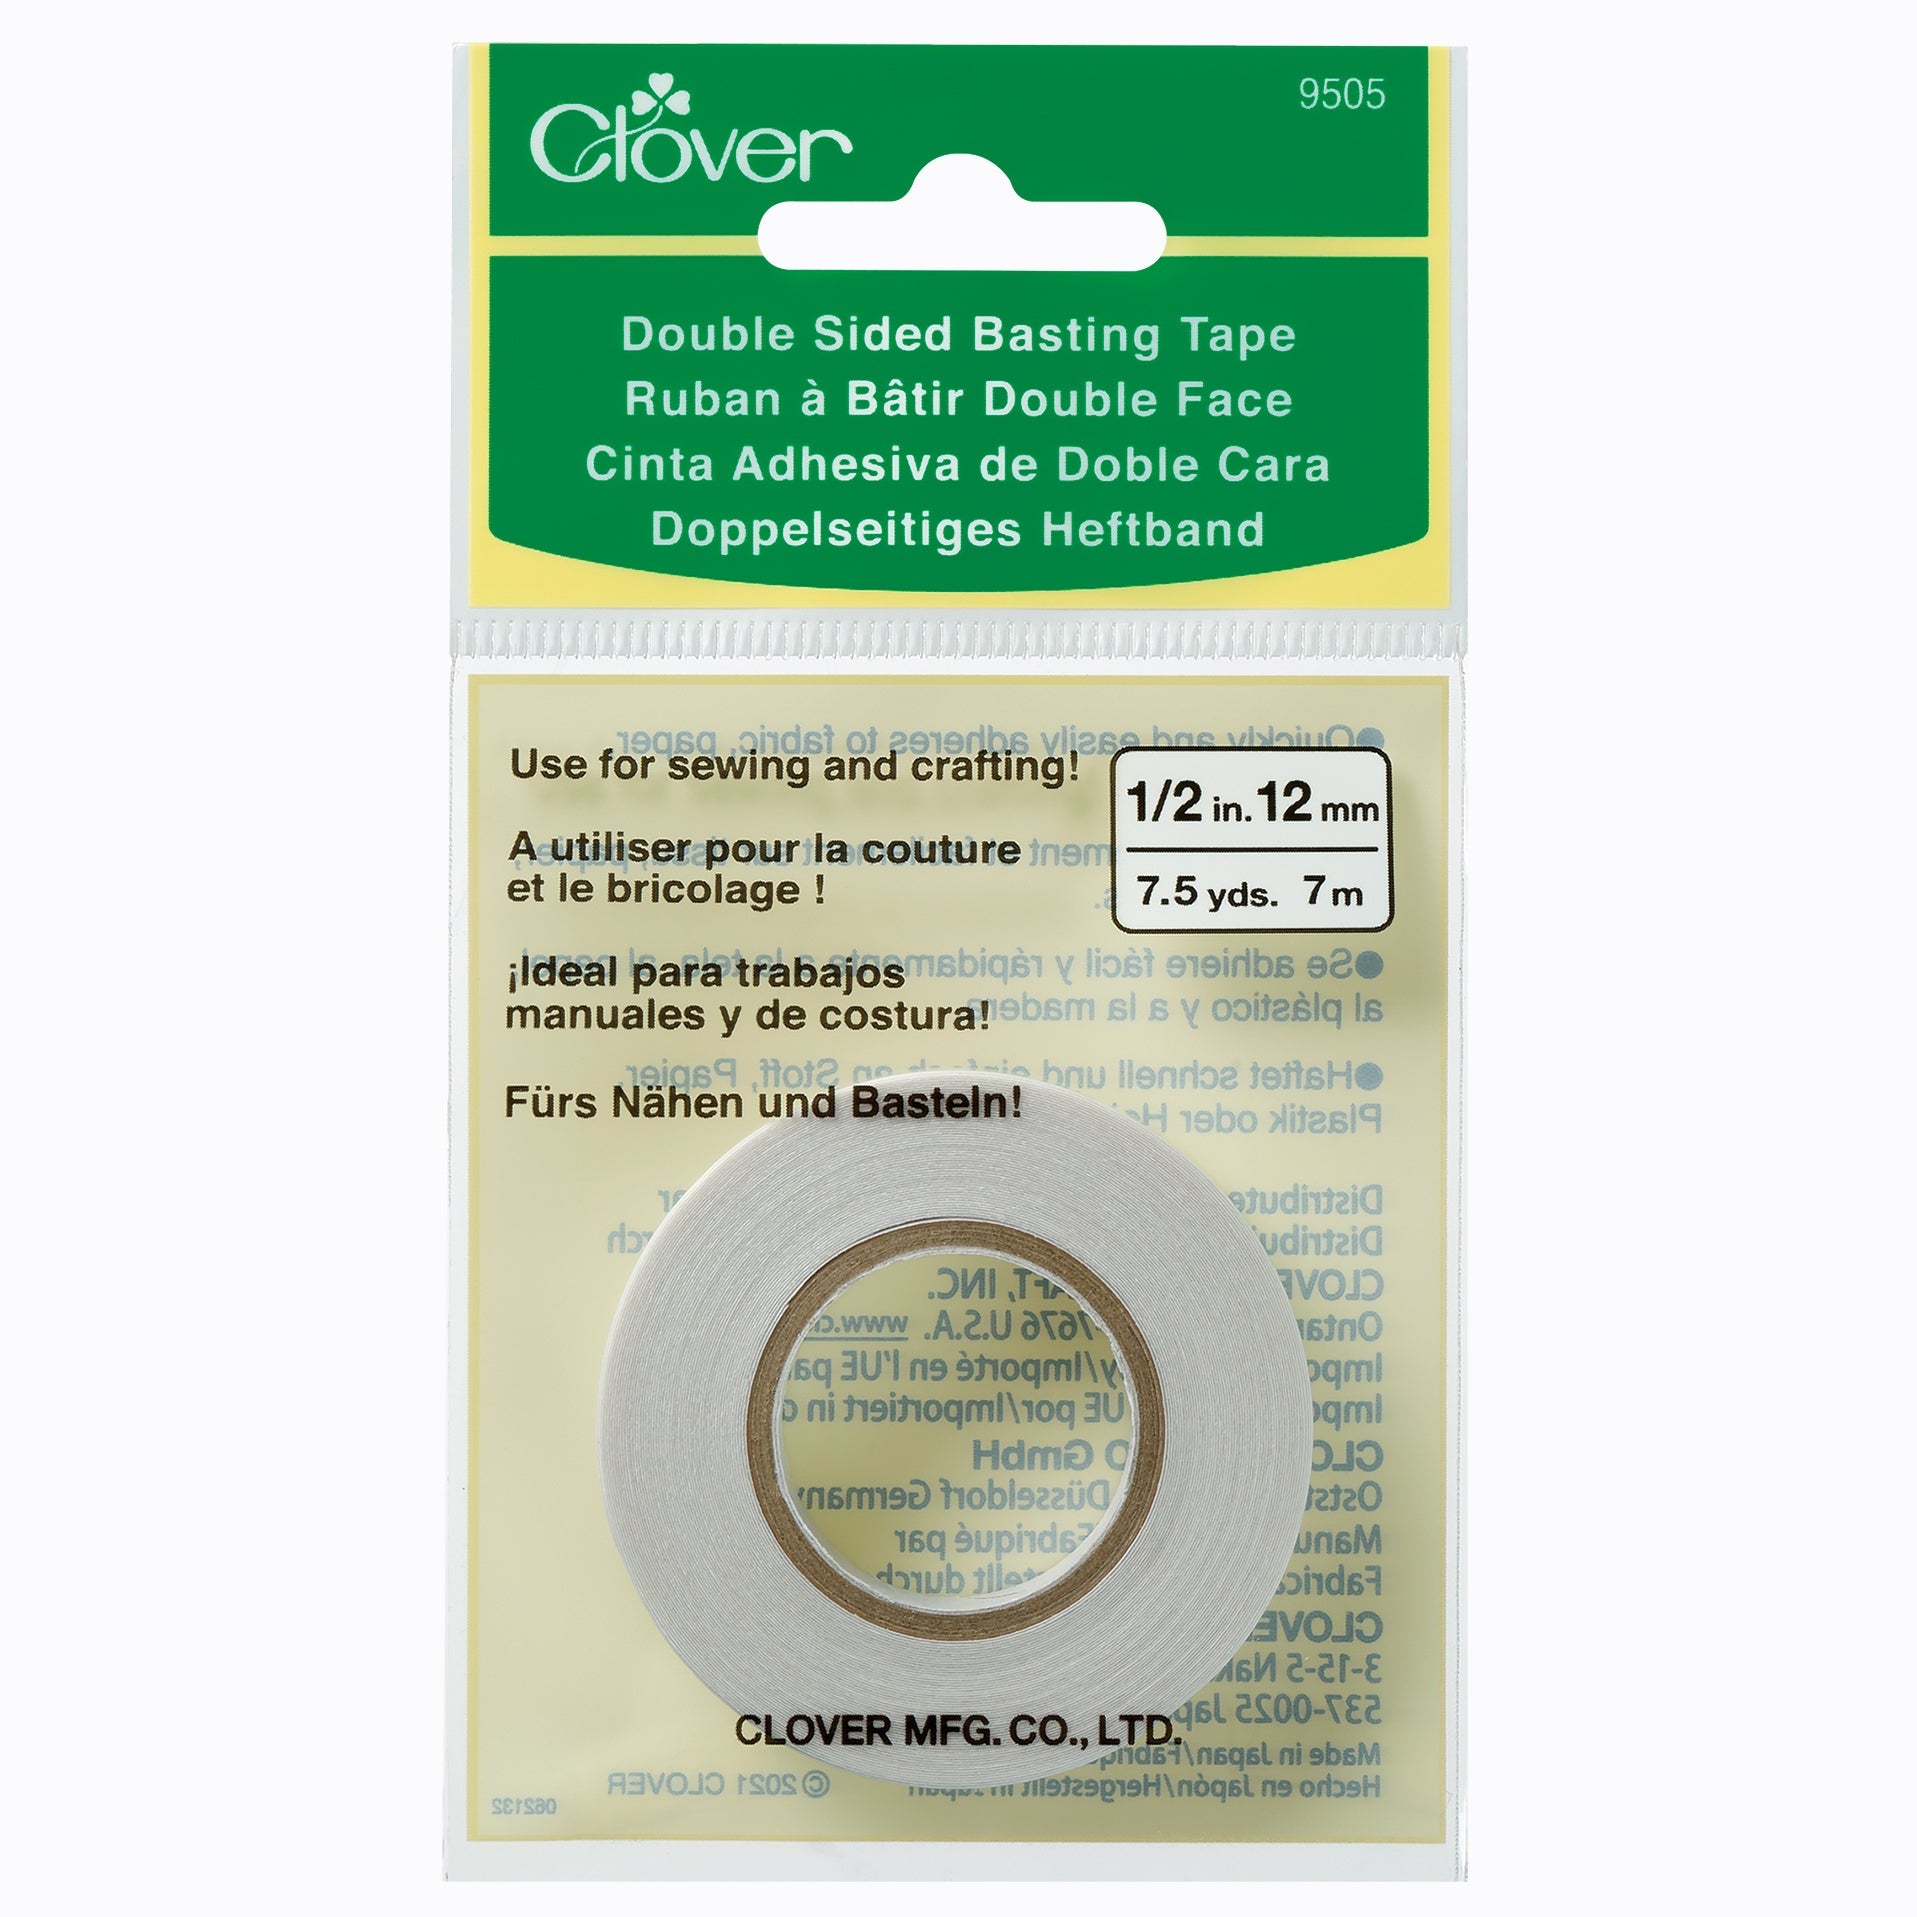 CLV - Double Sided Basting Tape